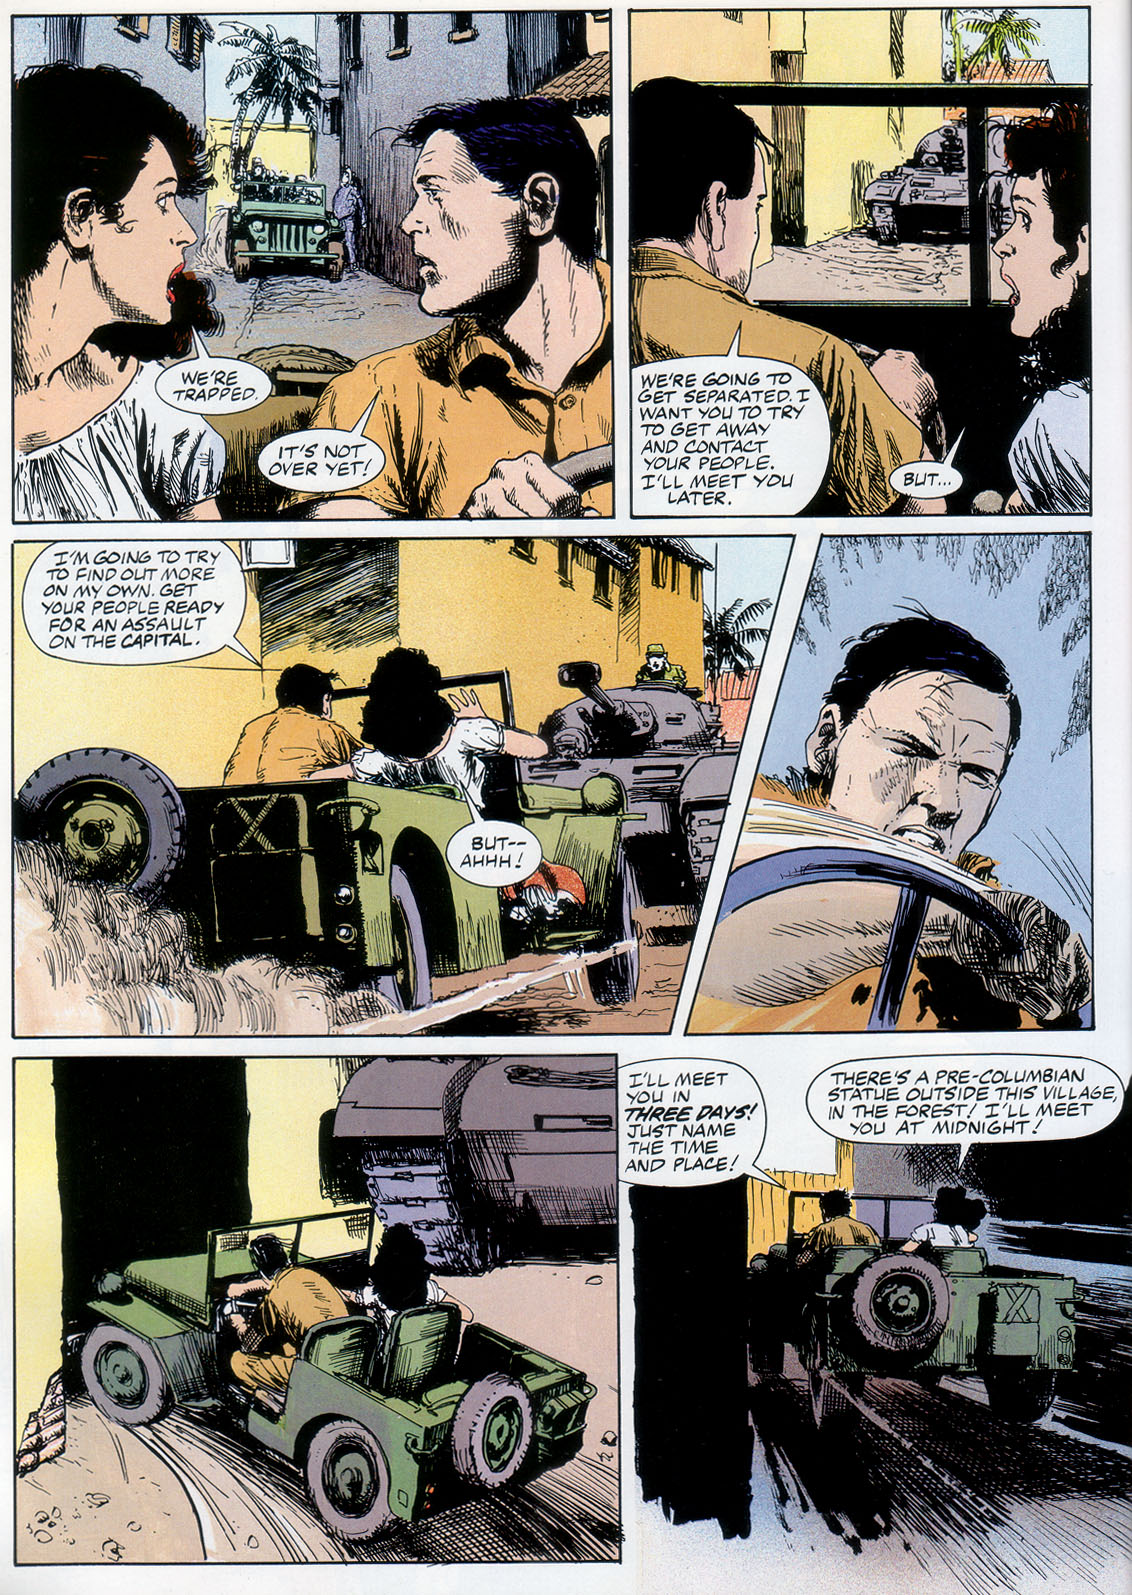 Marvel Graphic Novel issue 57 - Rick Mason - The Agent - Page 52